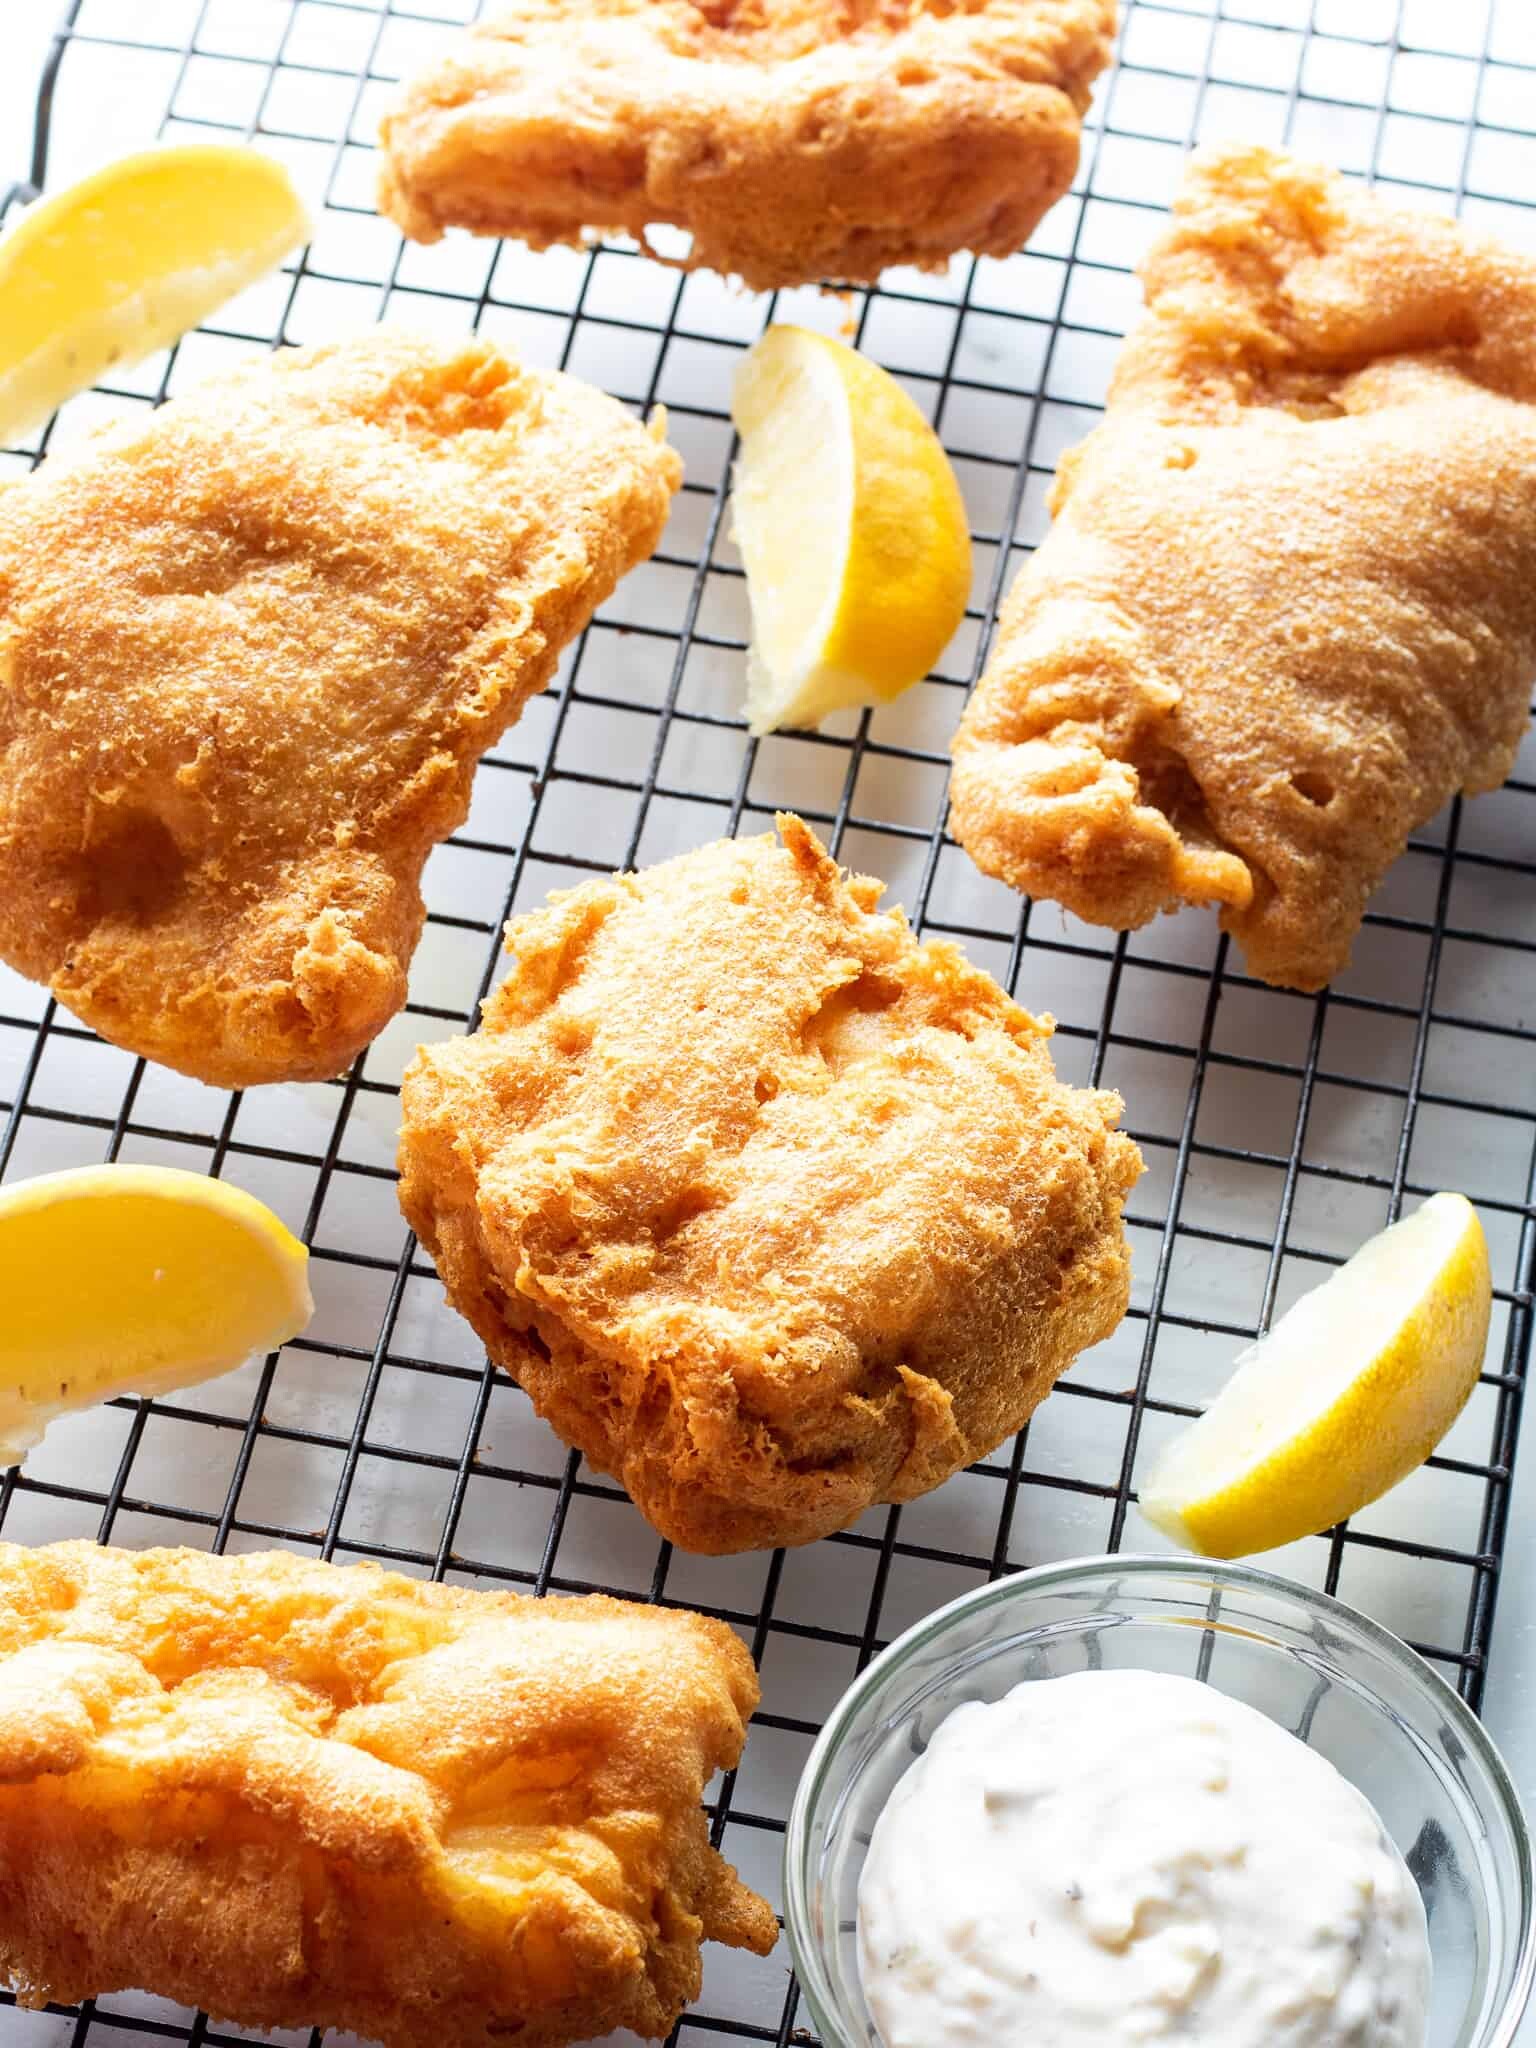 Keto Fried Fish - Low Carb Battered Cod Fish • The Farmstead Chick